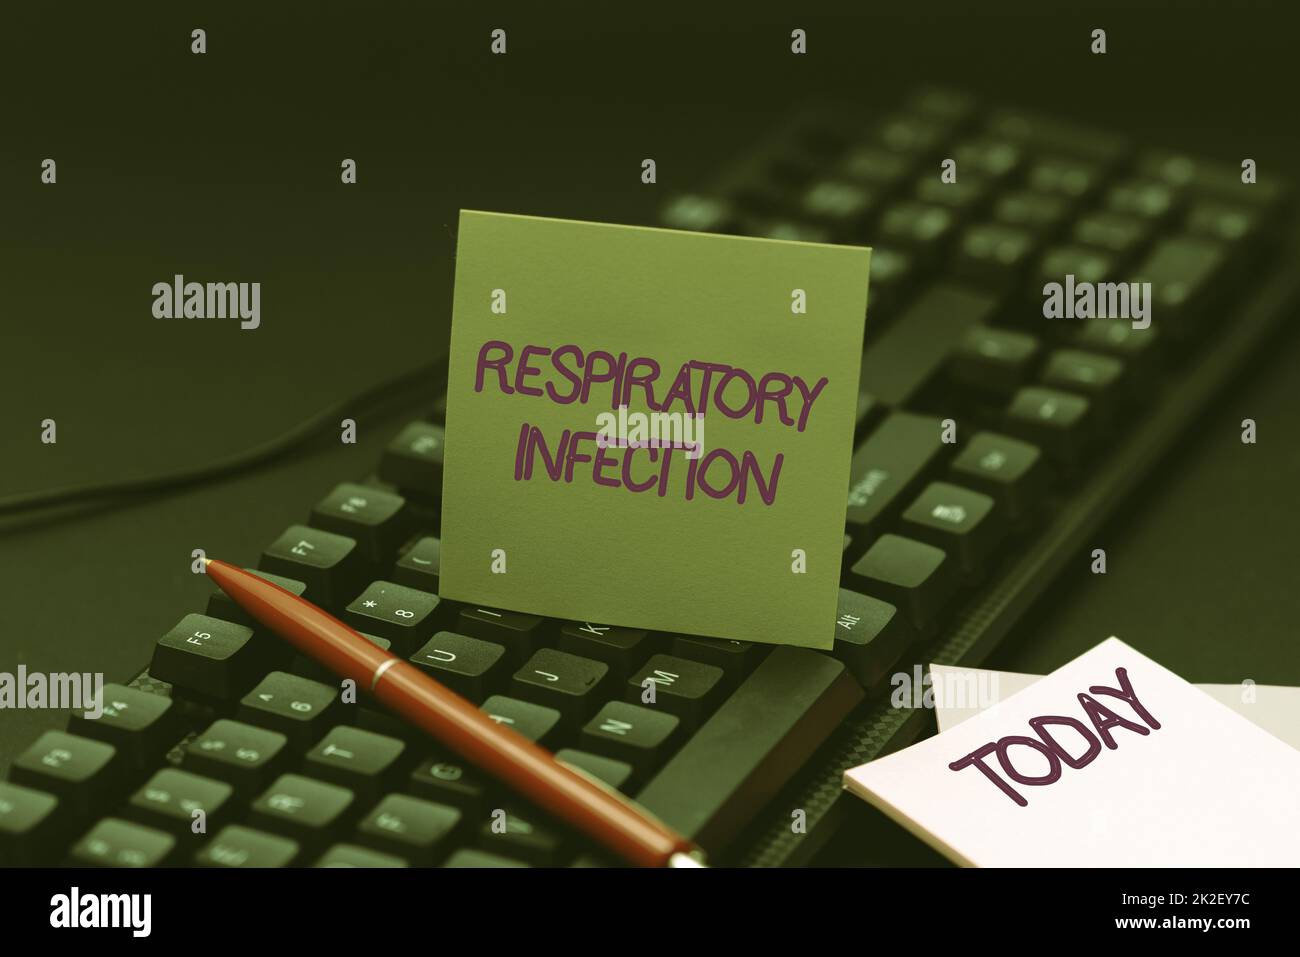 Handwriting text Respiratory Infection. Internet Concept any infectious disease that directly affects the normal breathing Typewriting Movie Review Article, Typing Fresh Food Blog Article Stock Photo